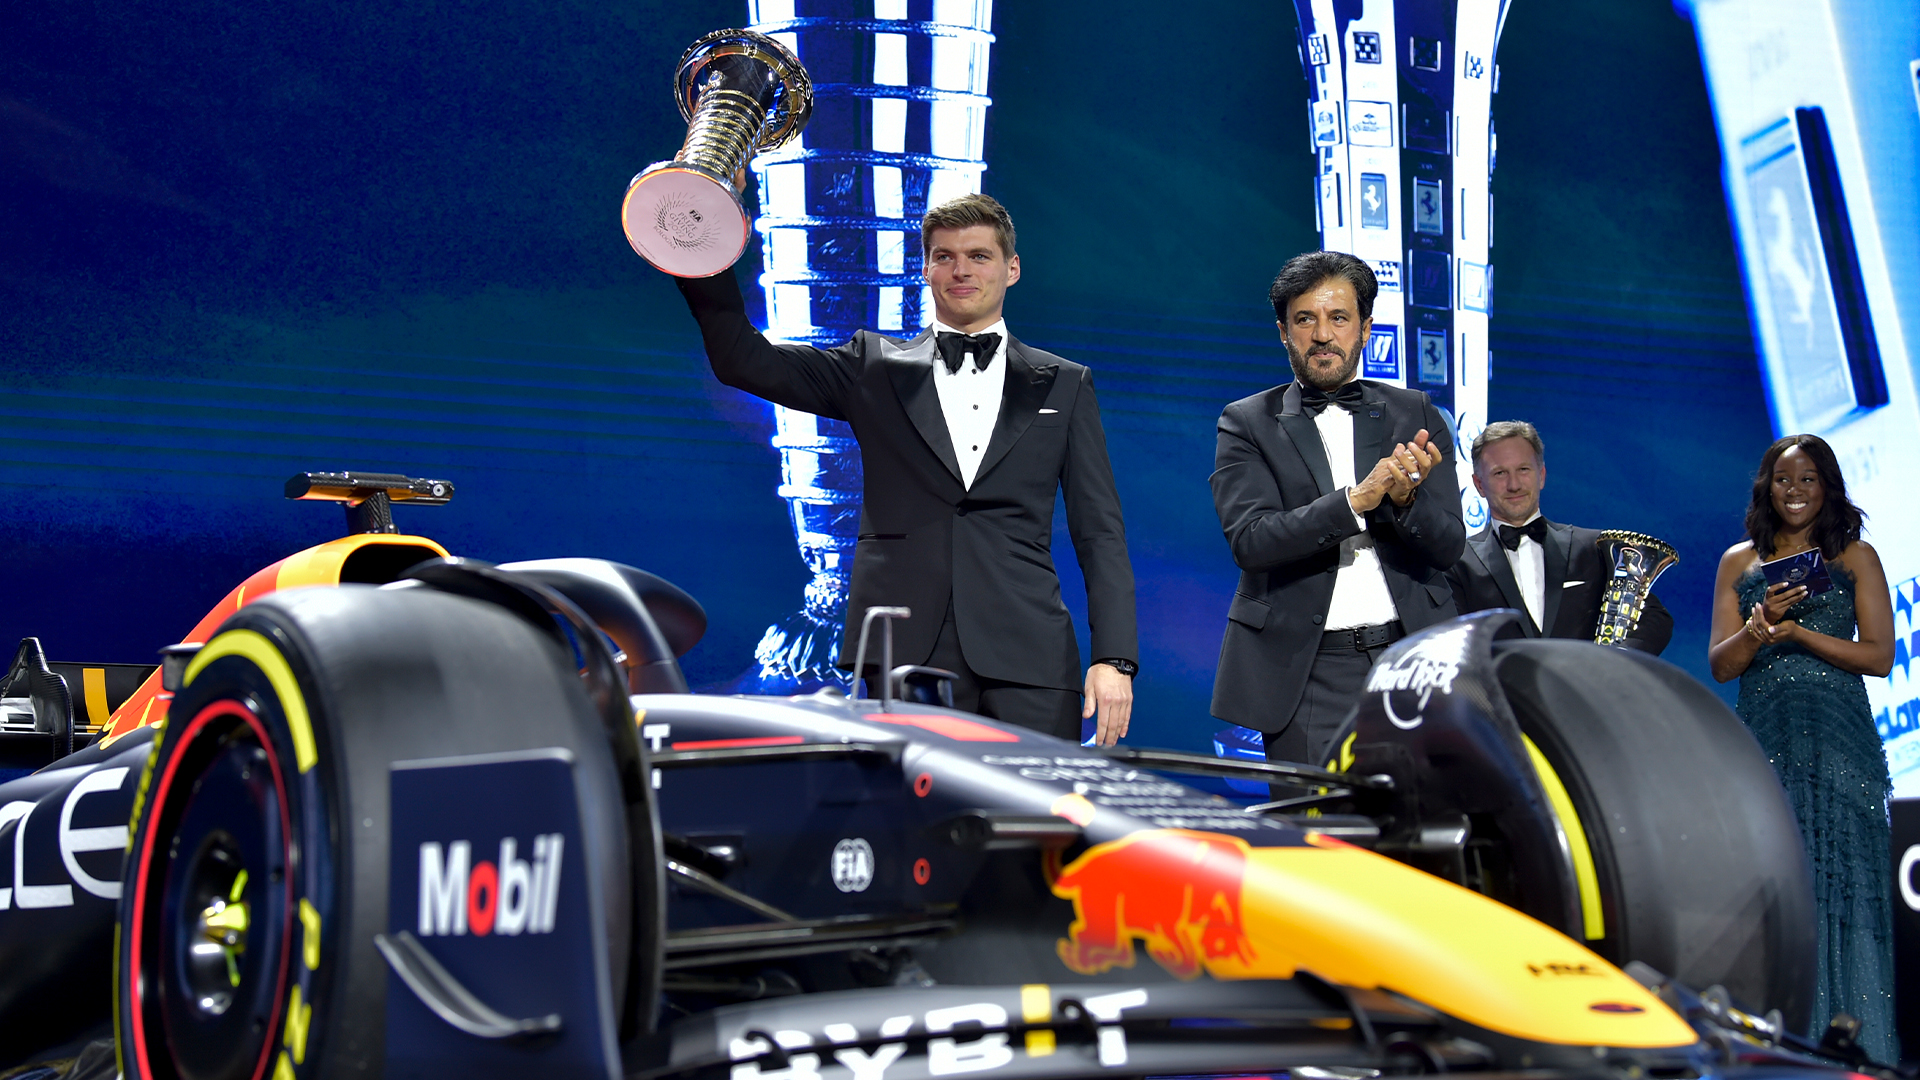 Verstappen says he "never could have imagined" 2022 success as he collects  trophy · RaceFans